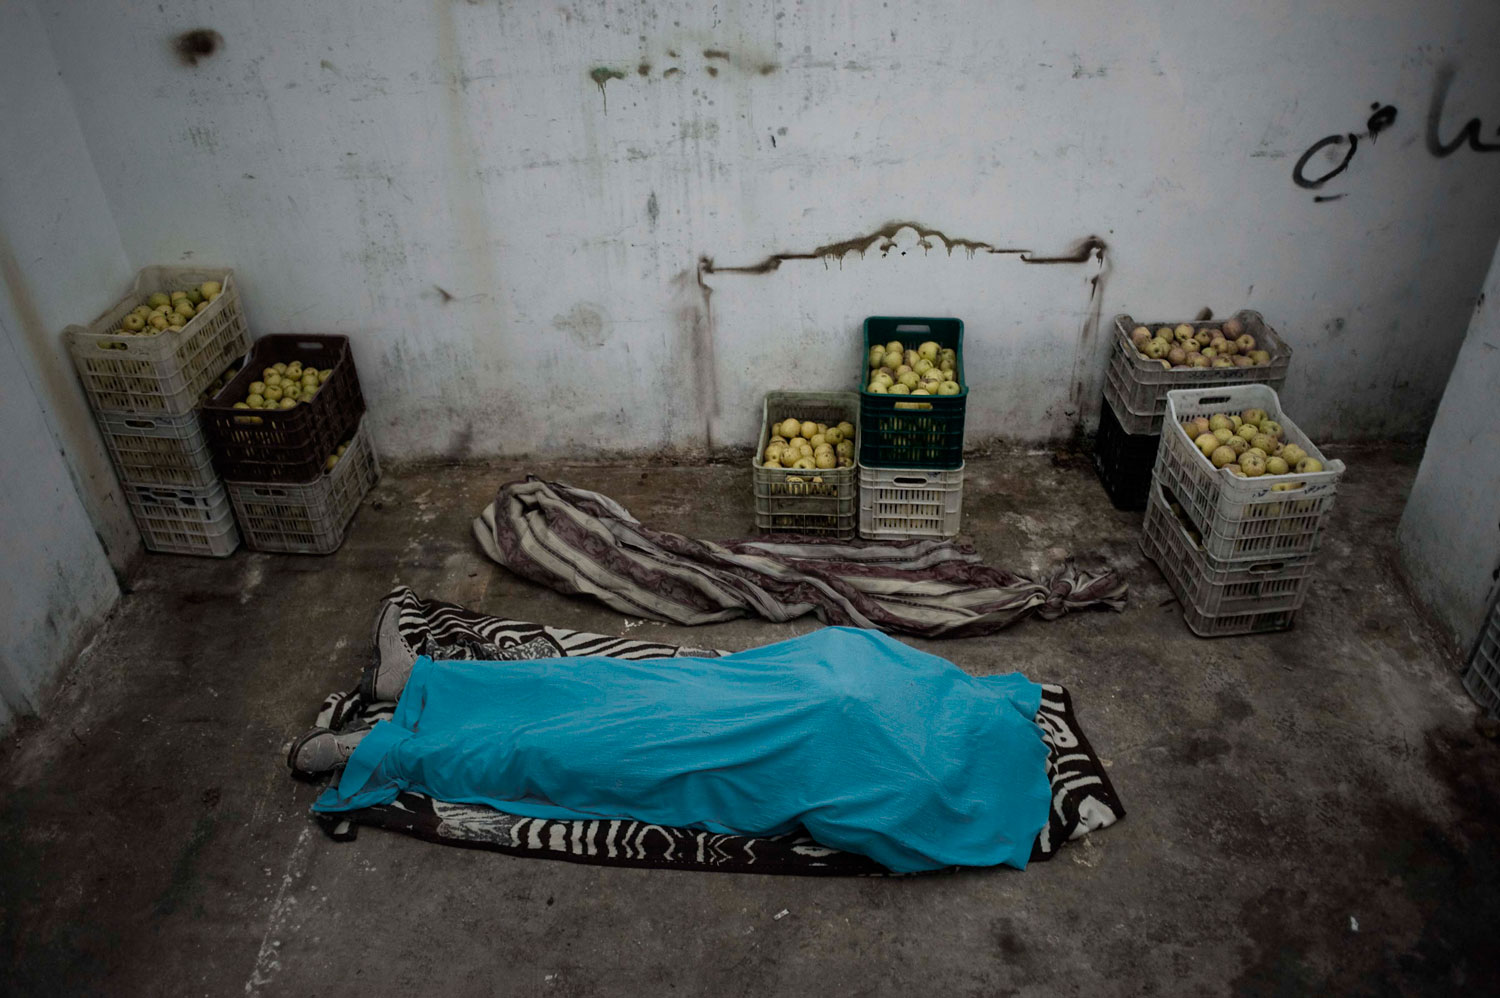 Feb. 9, 2012. The dead body of a Free Syrian Army fighter lies in an storage refrigerator in al-Qsair.